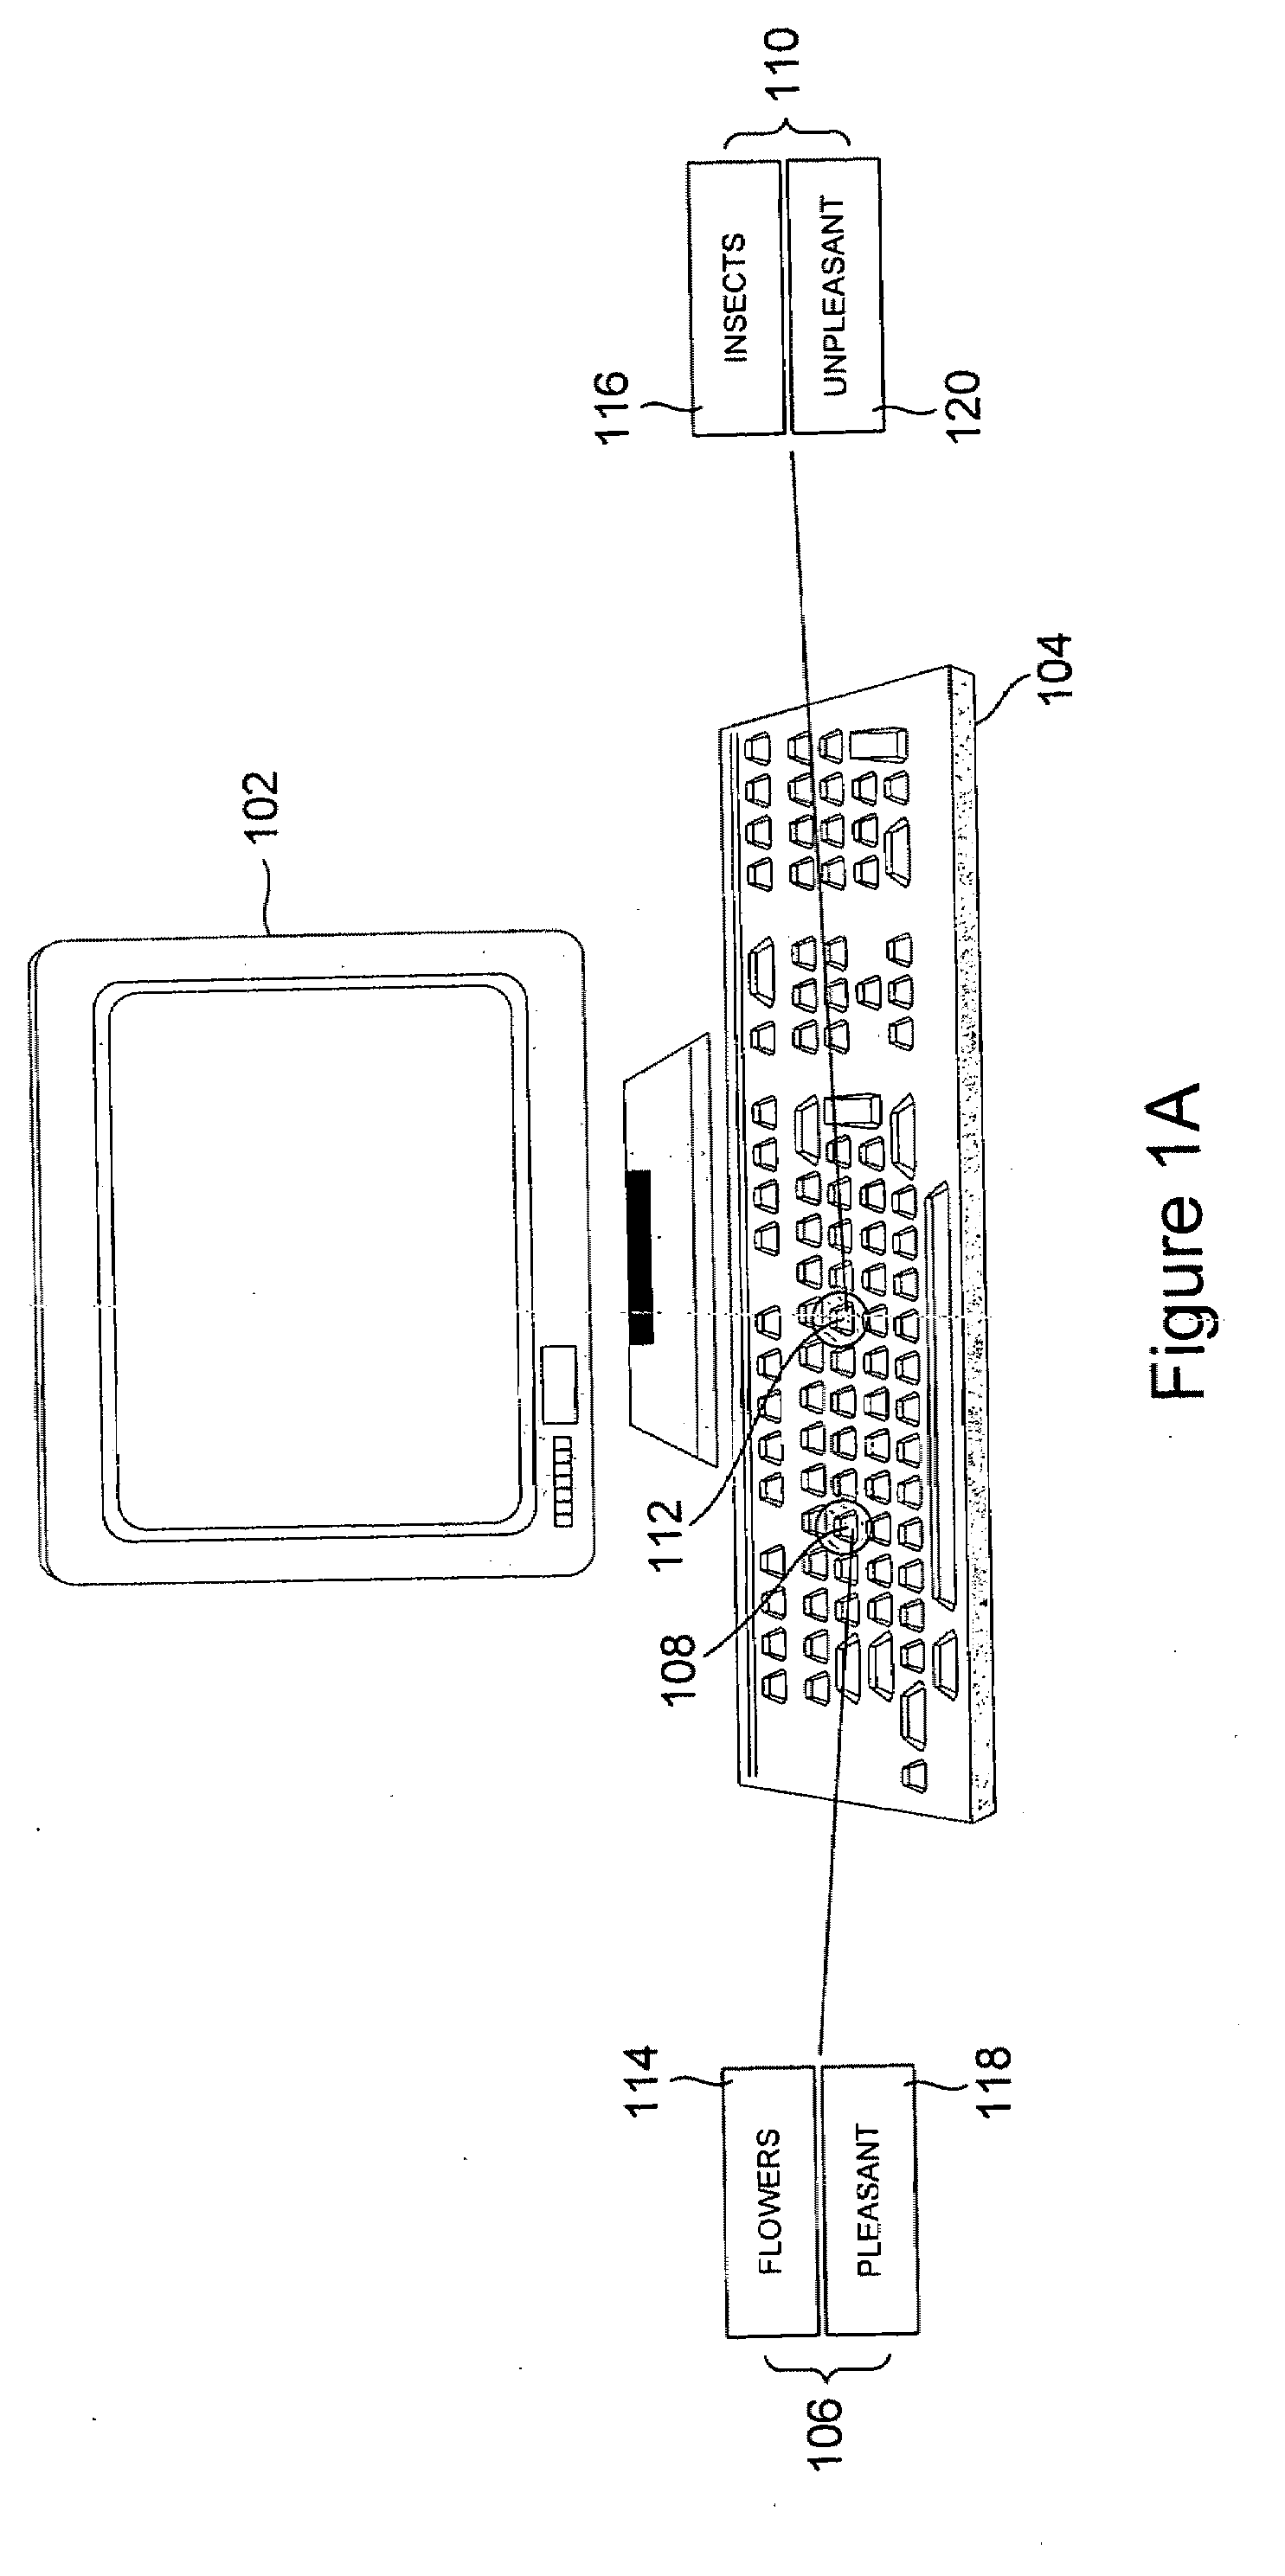 Method and system for developing and administering subject-appropriate implicit tests of association